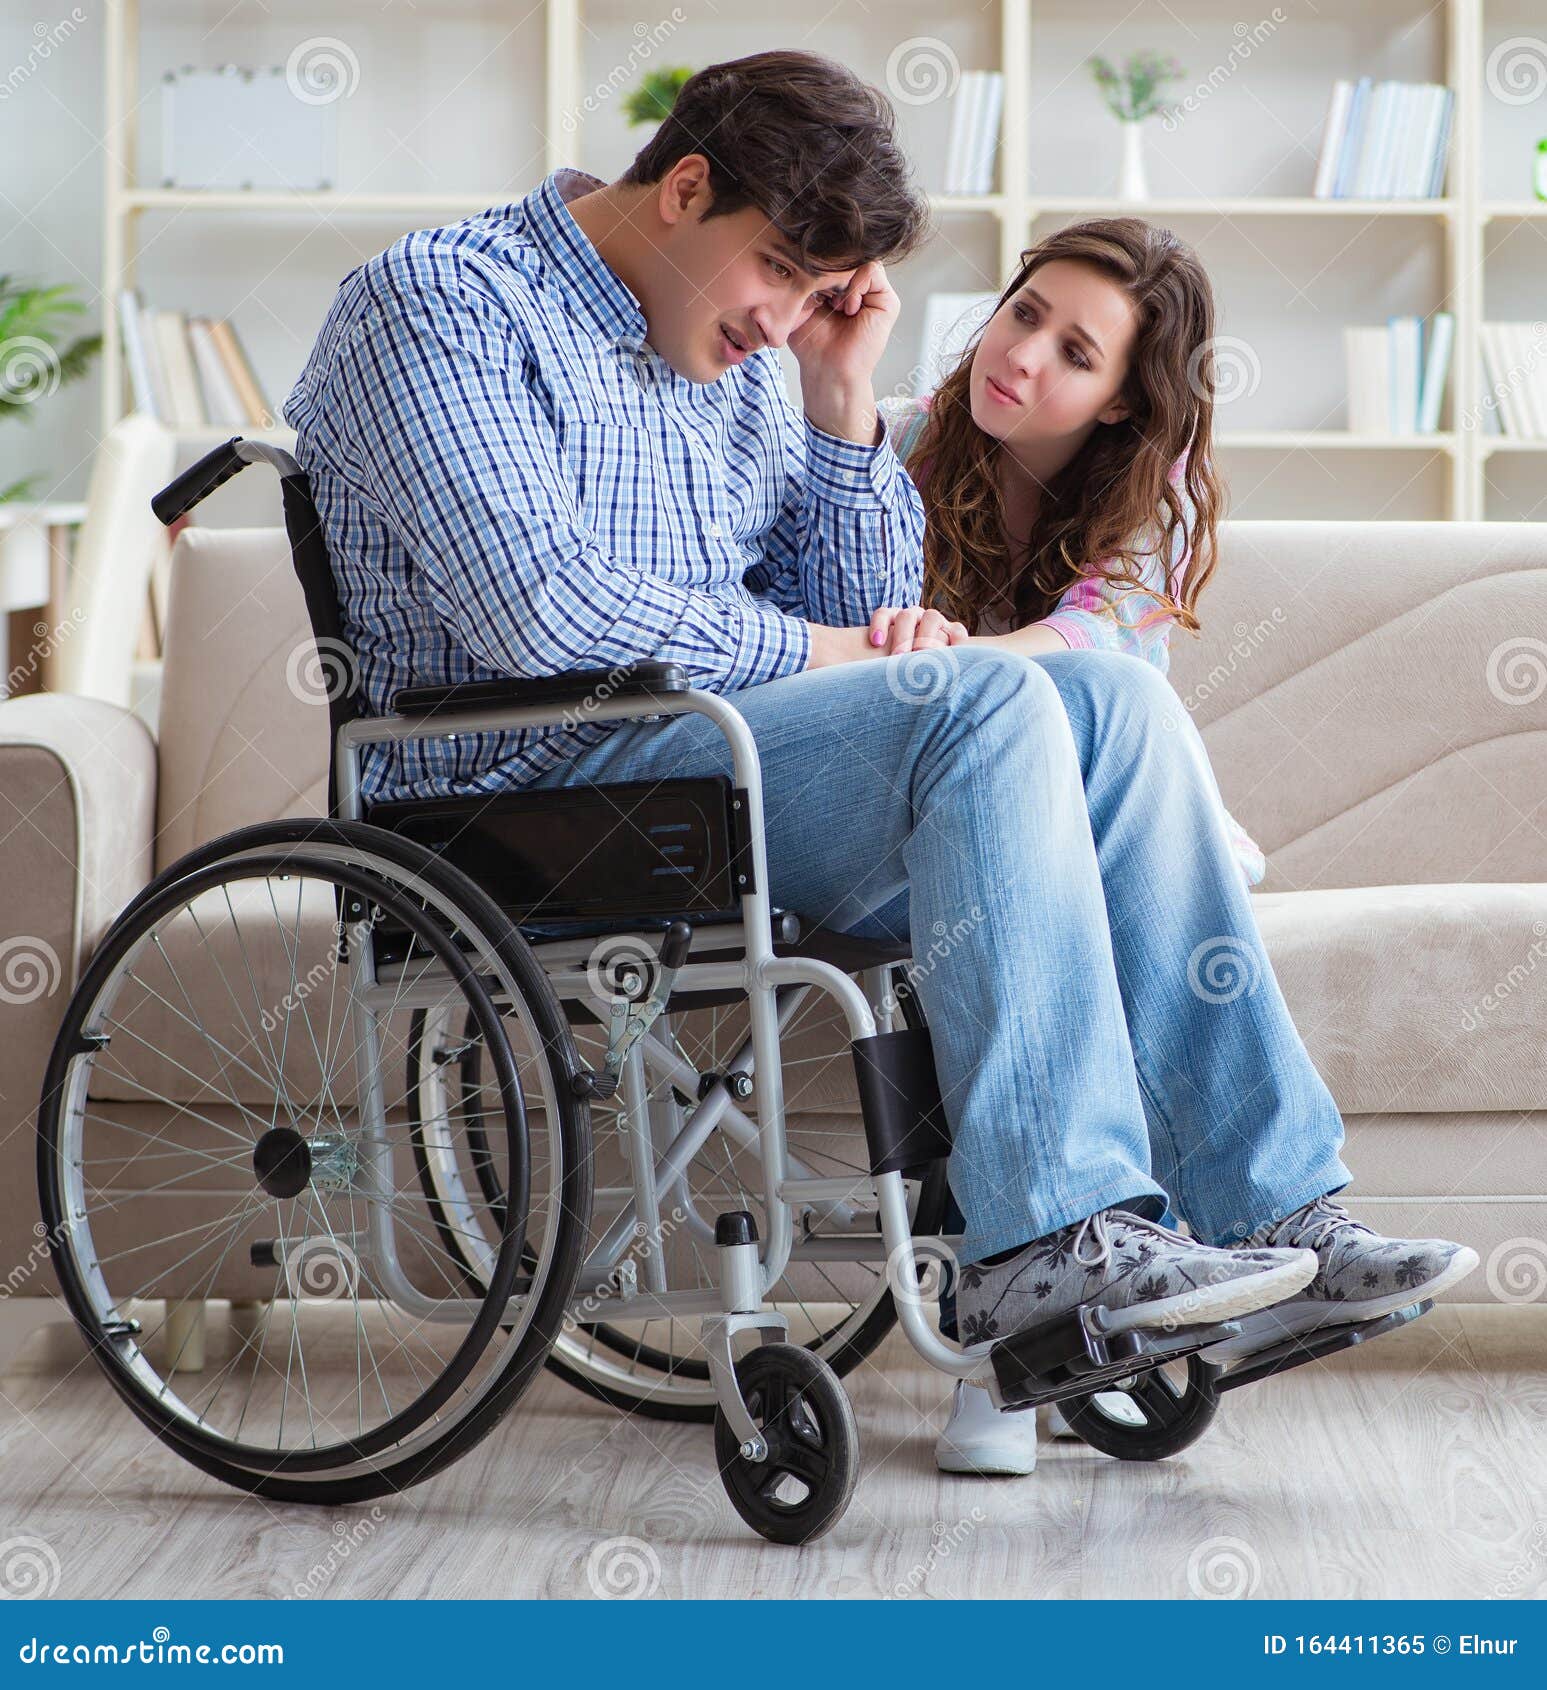 Desperate Disabled Person on Wheelchair Stock Image - Image of ...